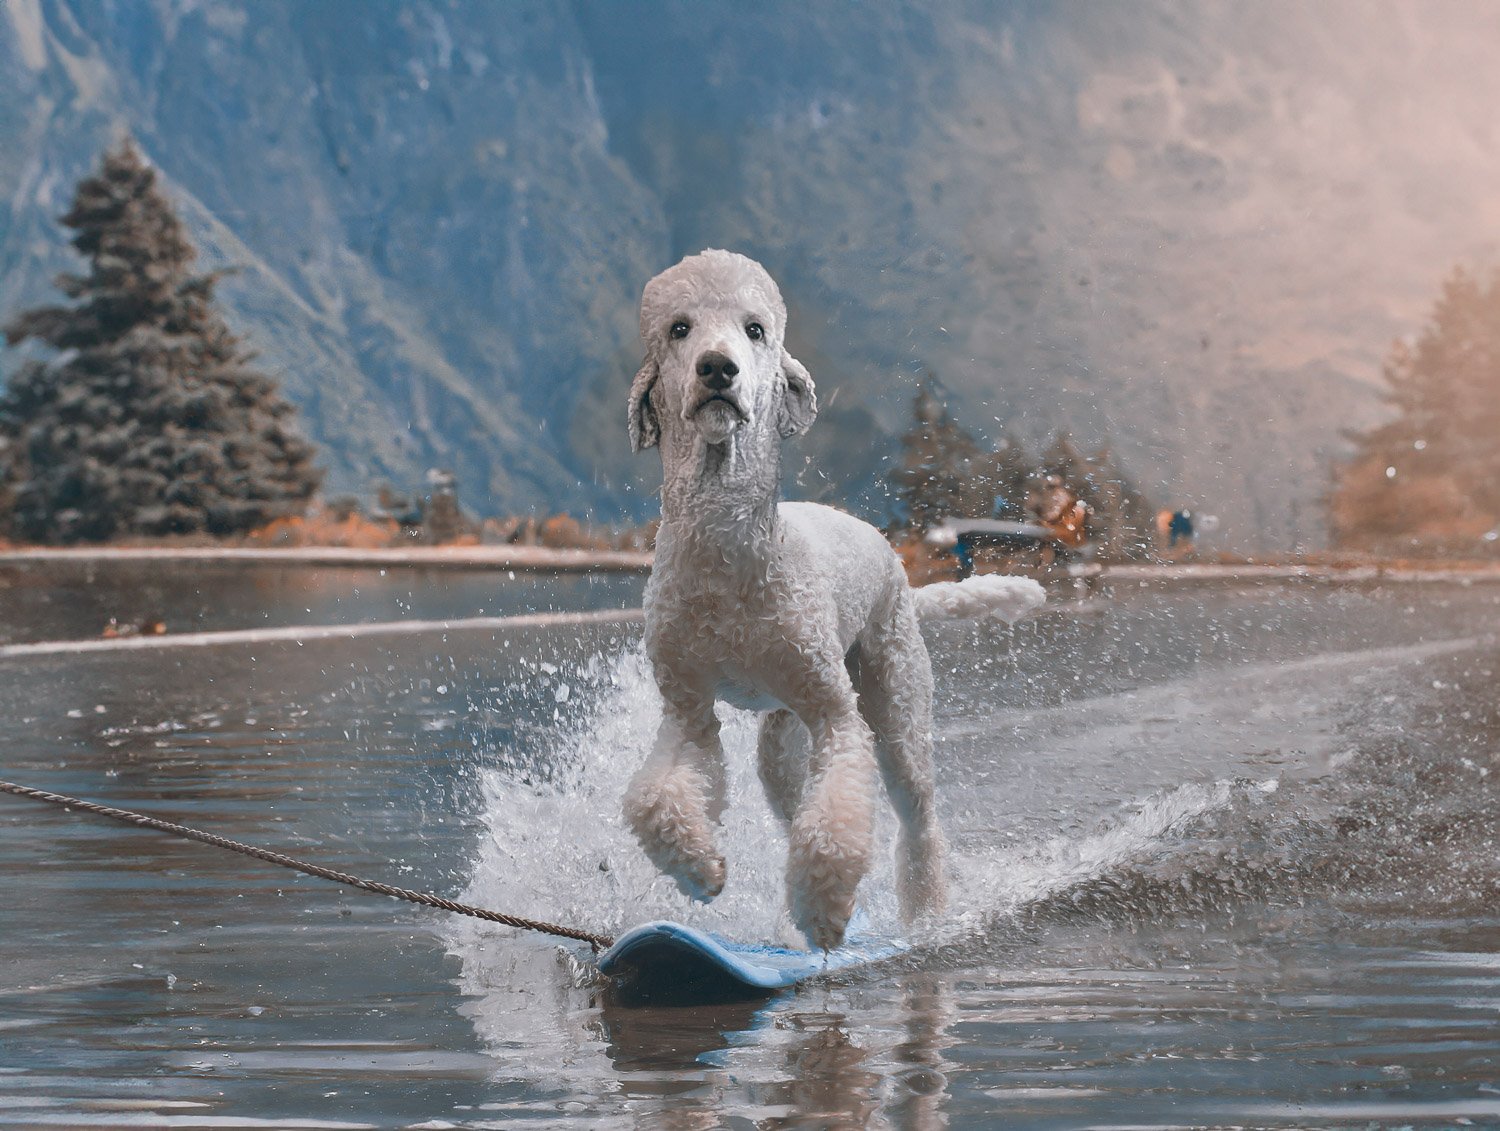 A large cream colored poodle dog being towed on a surfboard along a lake in a scenic mountain range